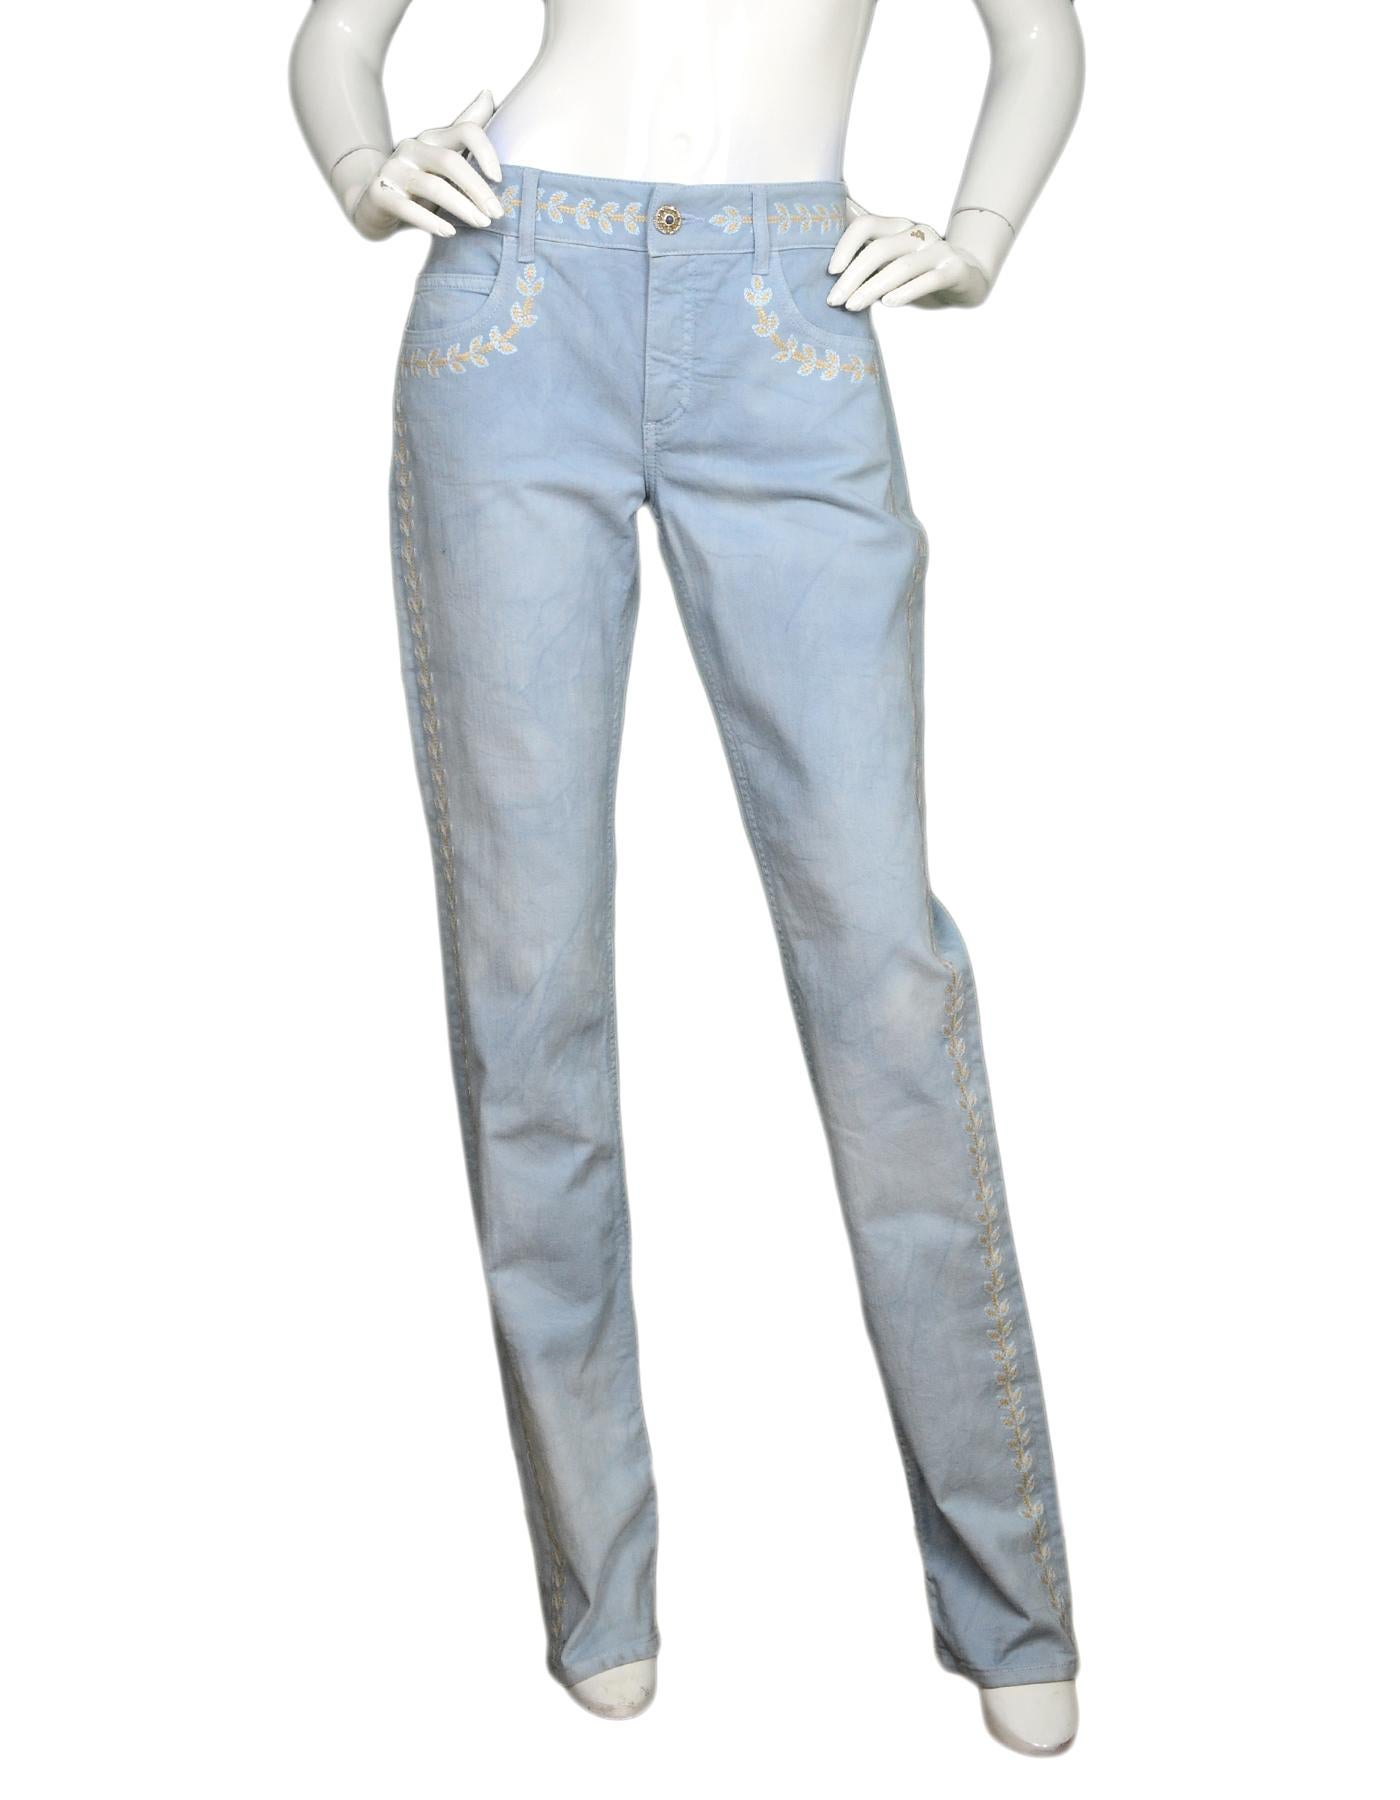 Chanel Blue Jeans W/ Floral Embroidery & CC Sz 40

Made In: Italy
Color: Light blue, tan 
Materials: 98% cotton, 2% elastomultiester 
Overall Condition: Excellent pre-owned condition 
Estimated Retail: $1,310 + tax
Includes: Original